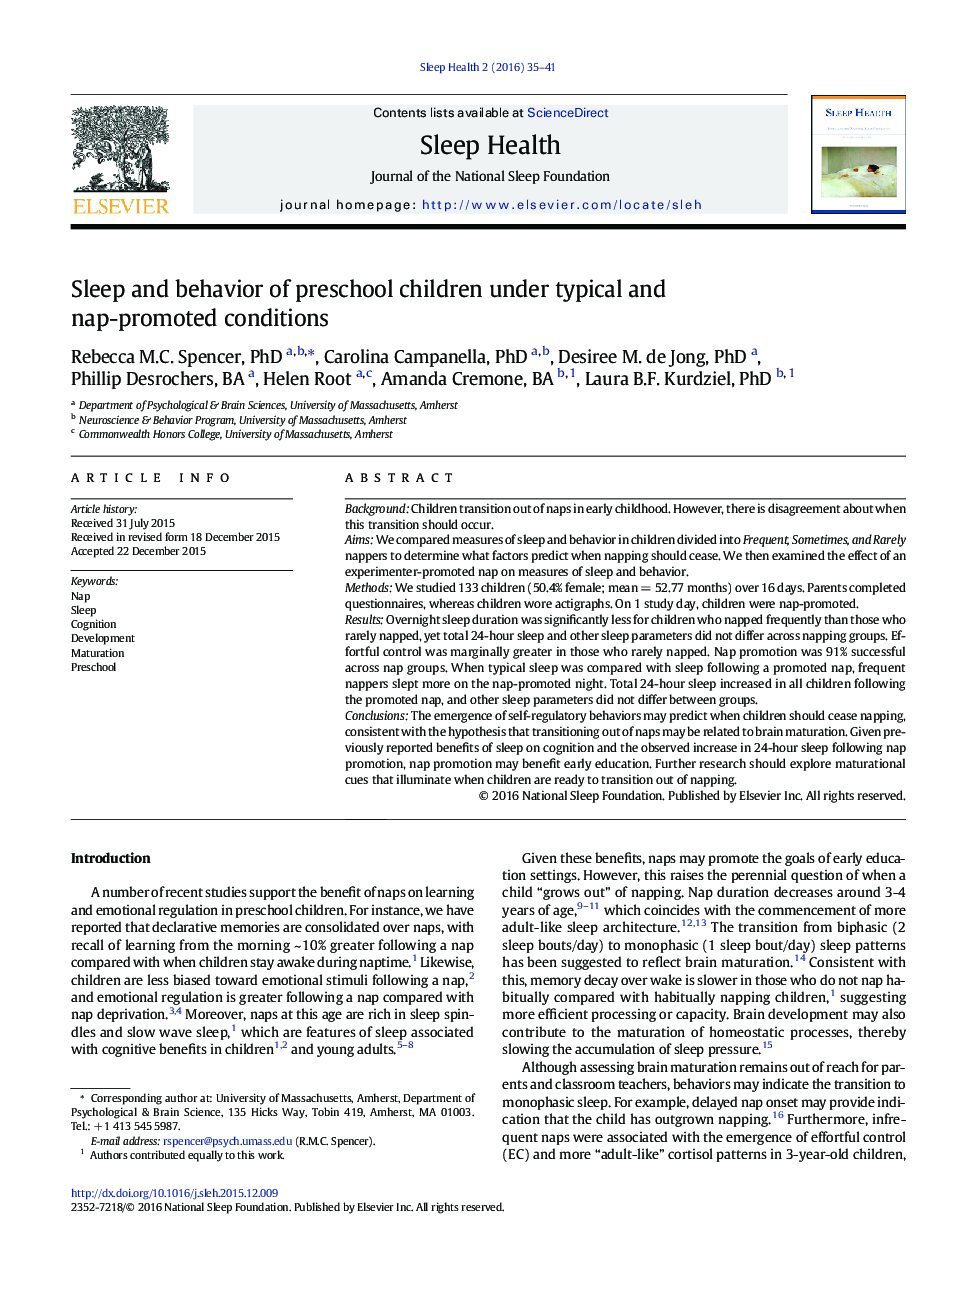 Sleep and behavior of preschool children under typical and nap-promoted conditions